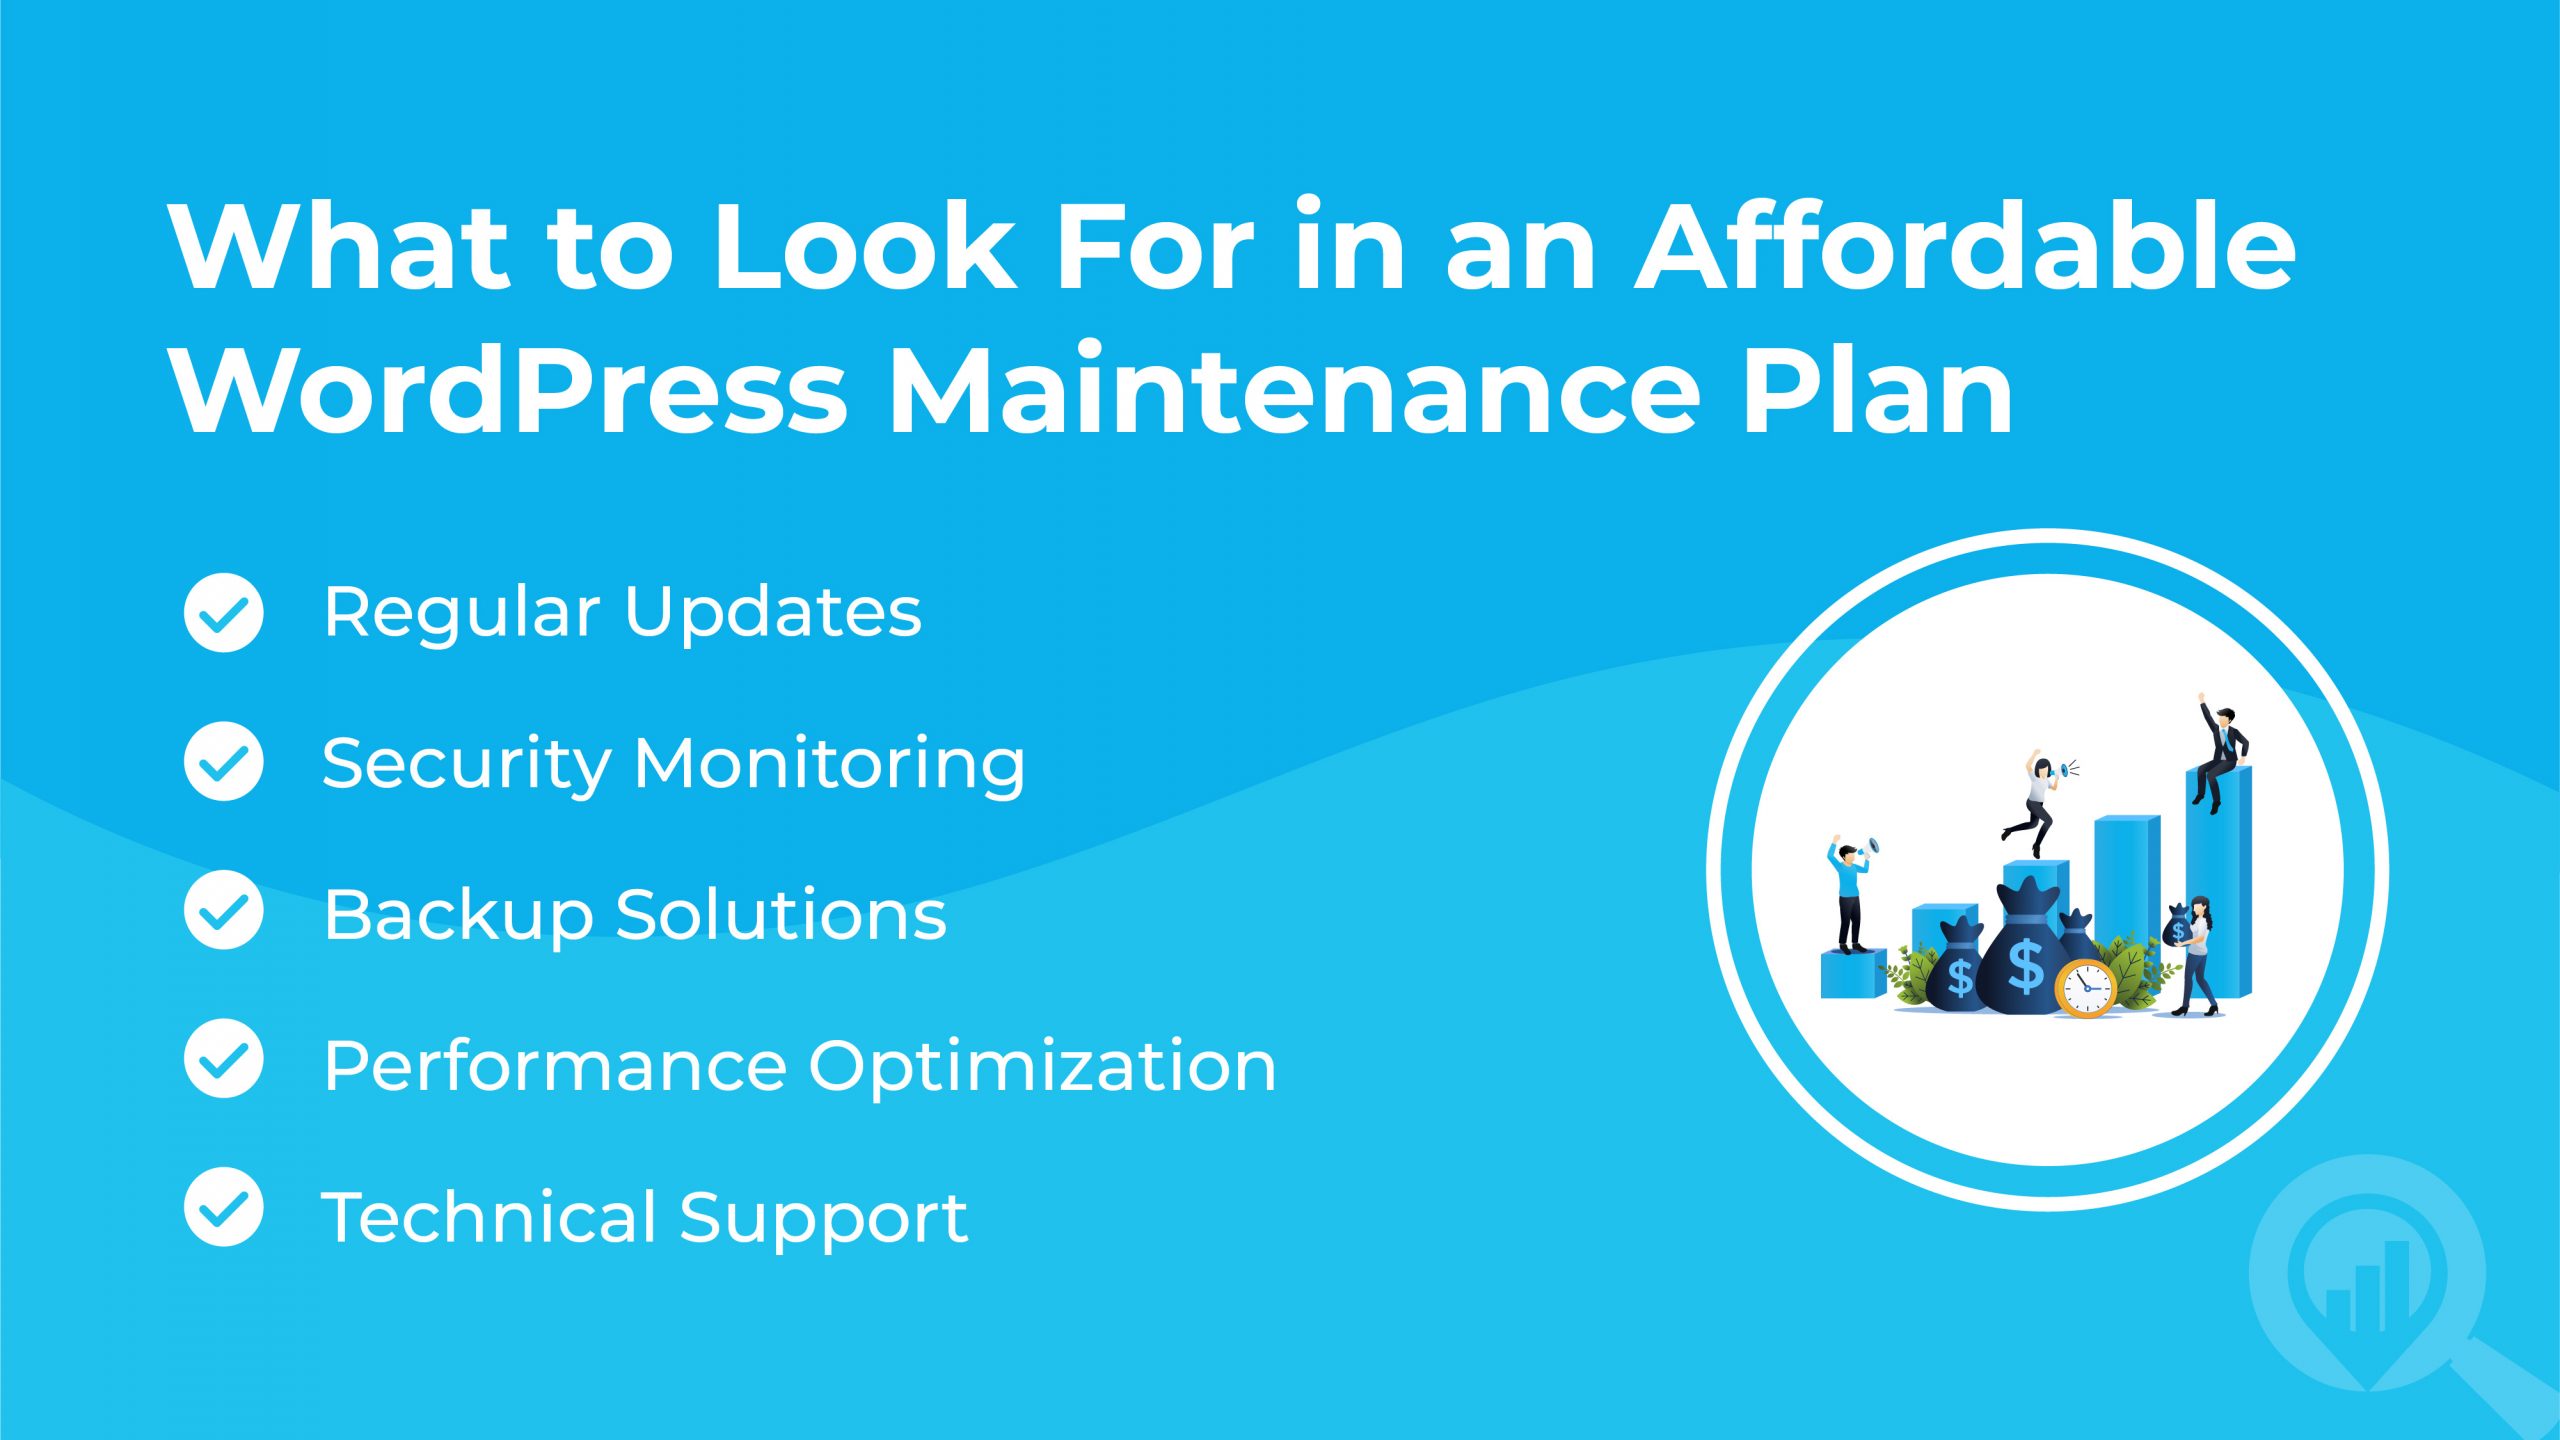 What To Look For In An Affordable WordPress Maintenance Plan